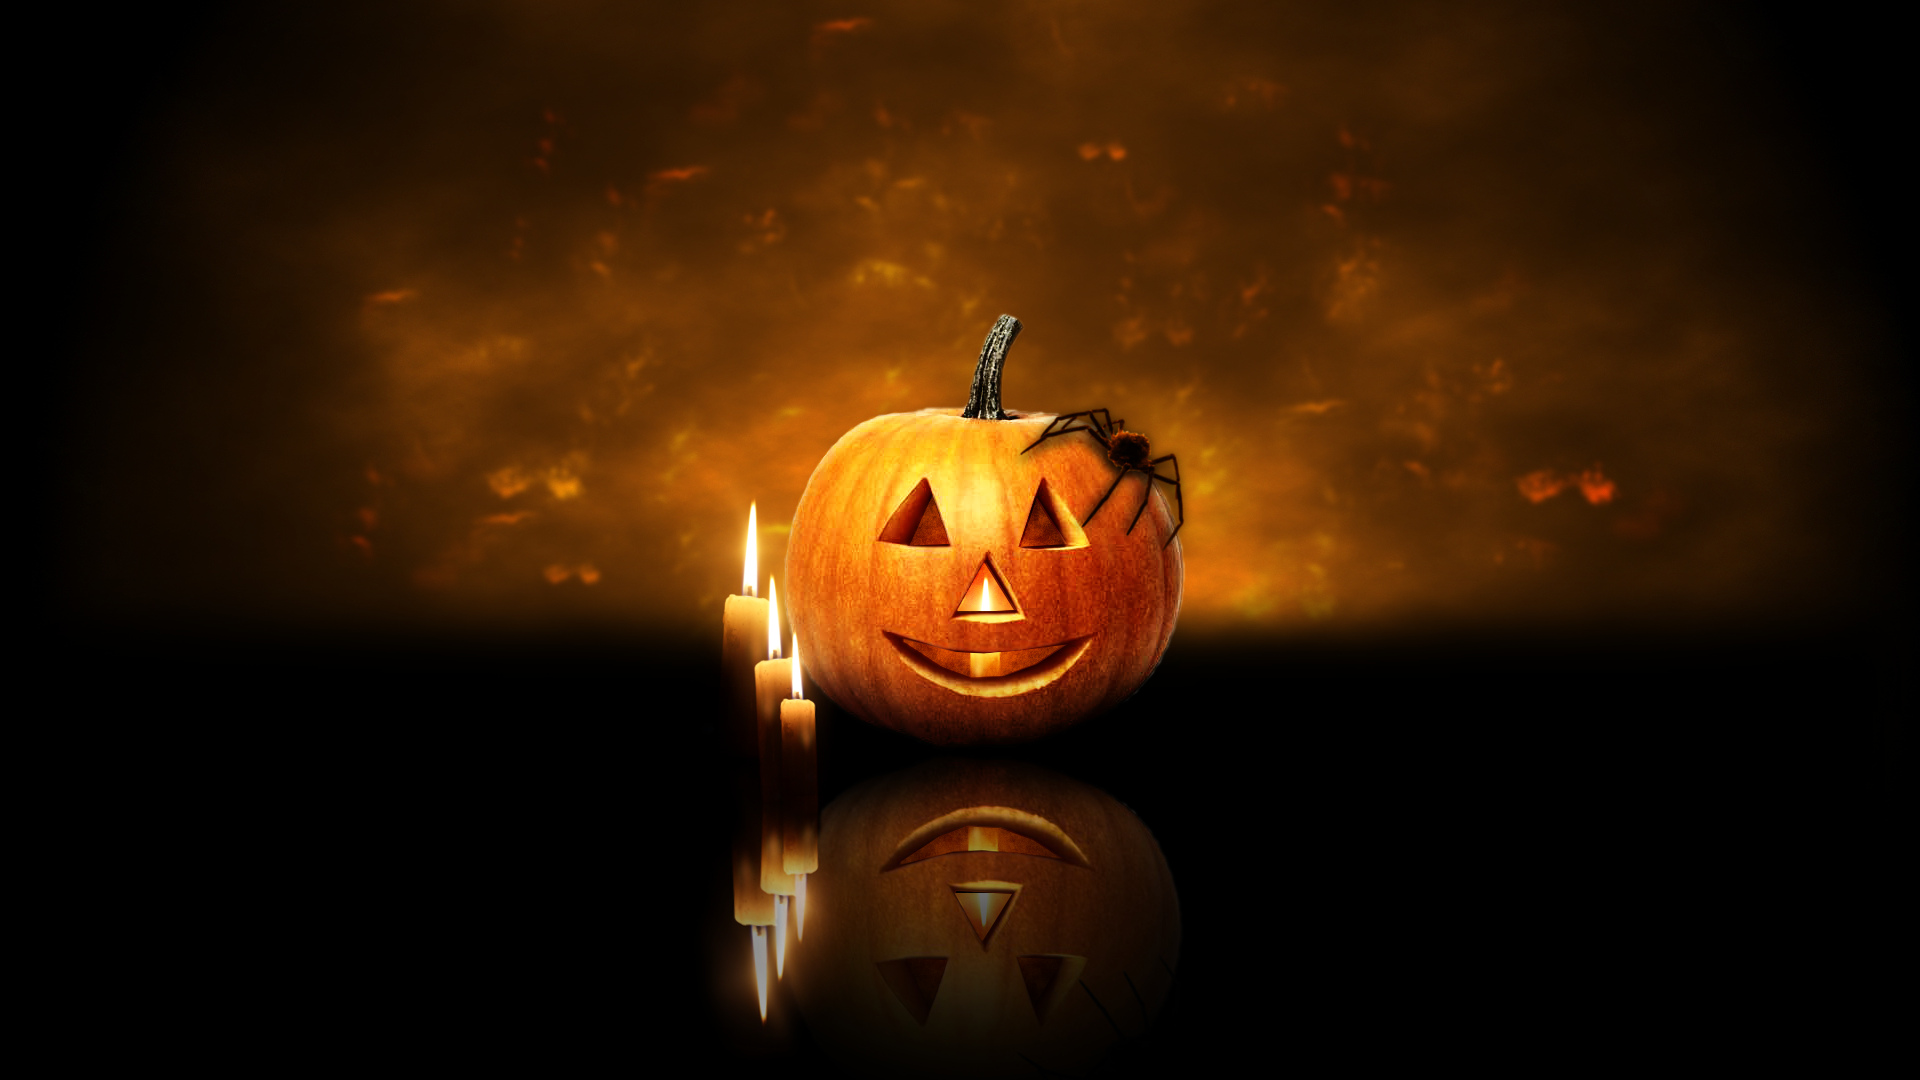 Scary Halloween HD Wallpapers Pumpkins Witches Spider Web